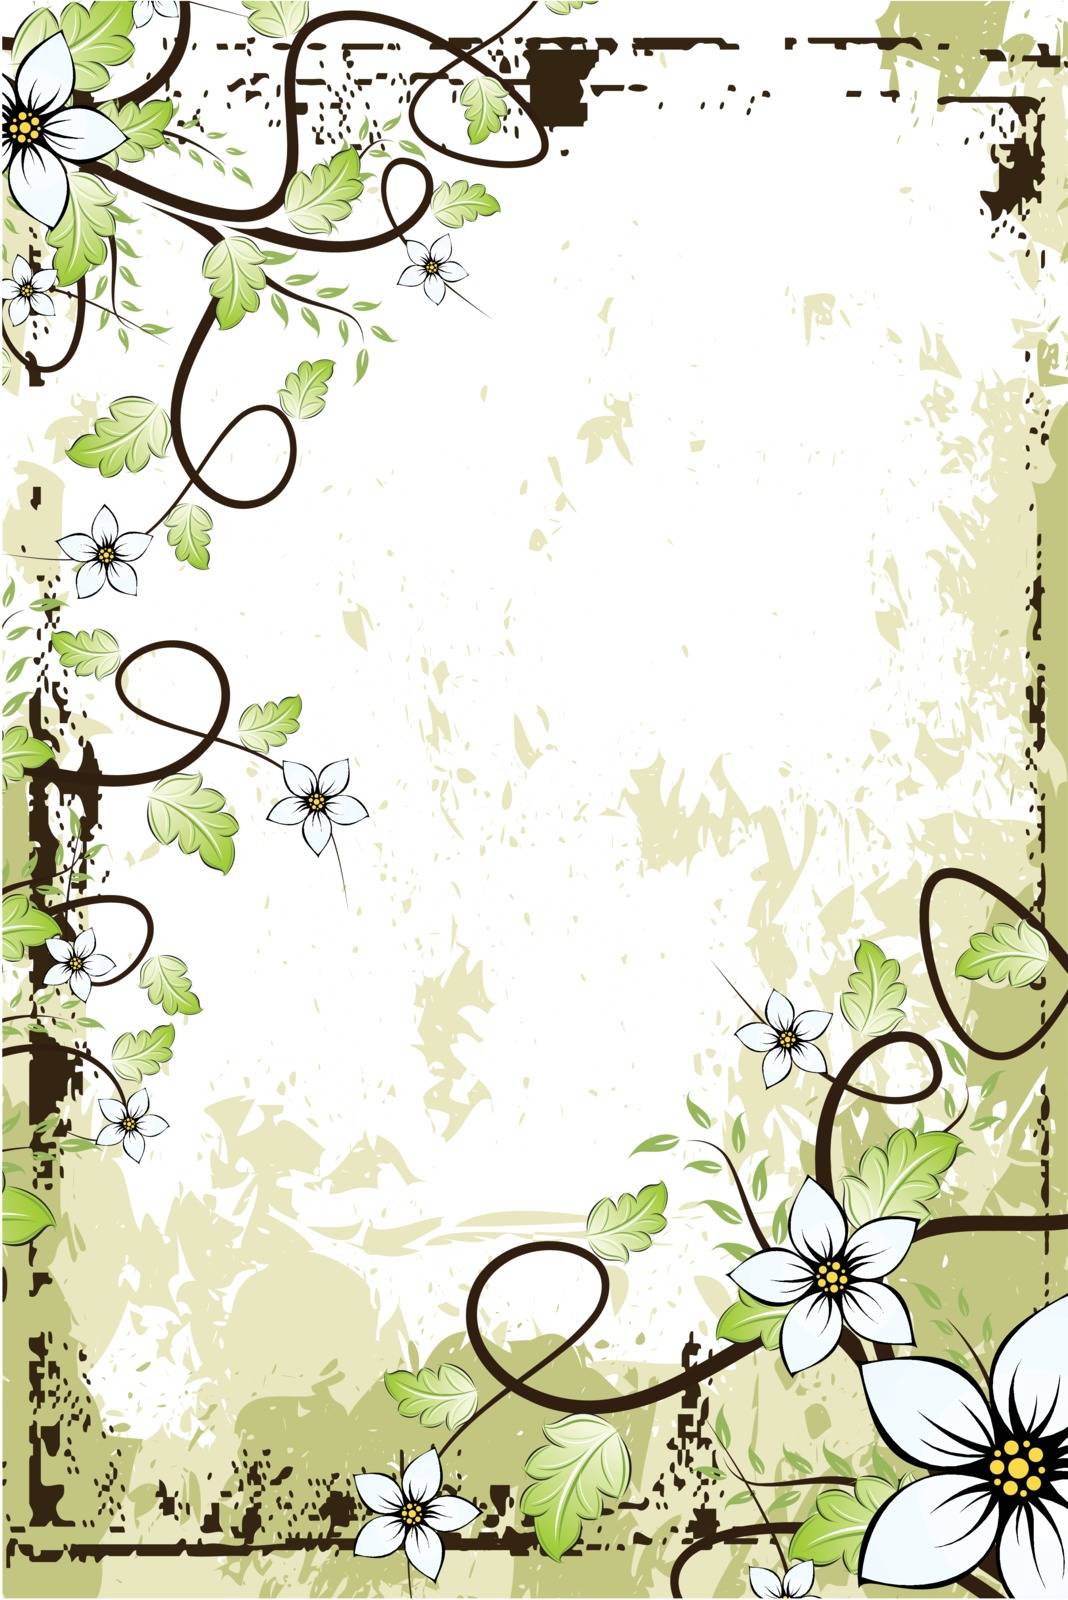 Abstract grunge vector floral background with leaves